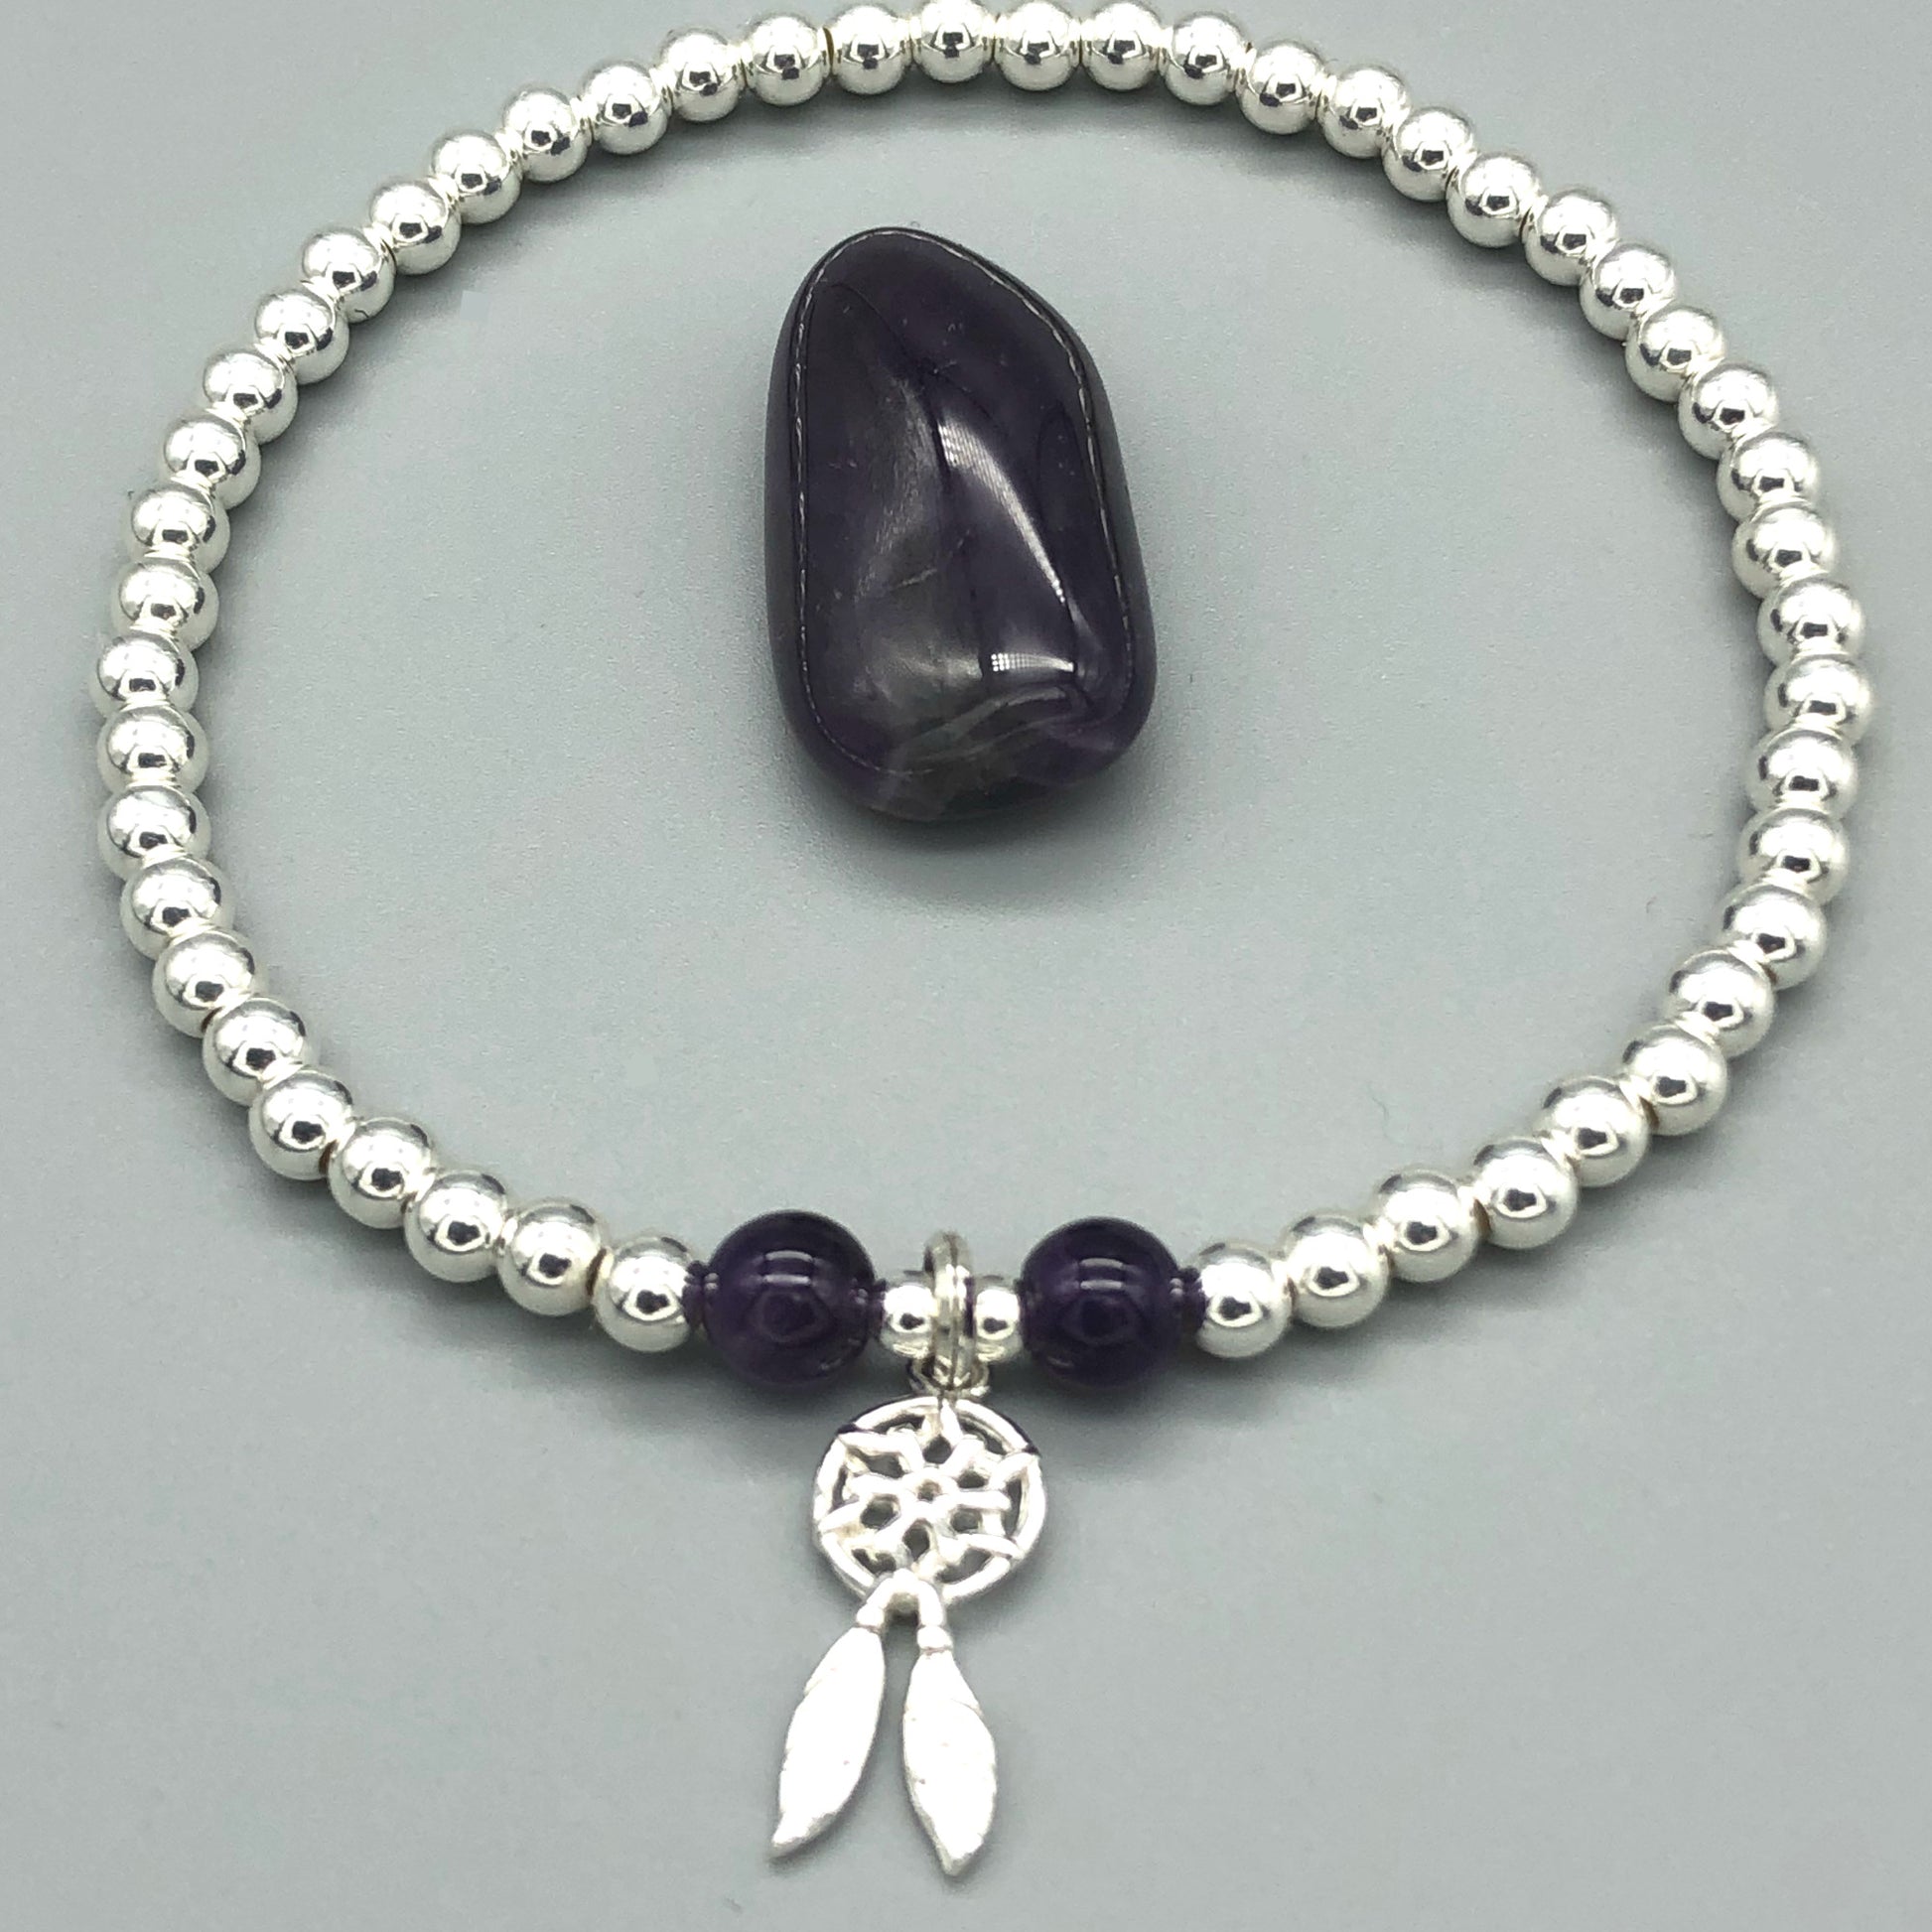 Dream Catcher Charm & Amethyst Crystal Beads Sterling Silver Stacking bracelet by My Silver Wish